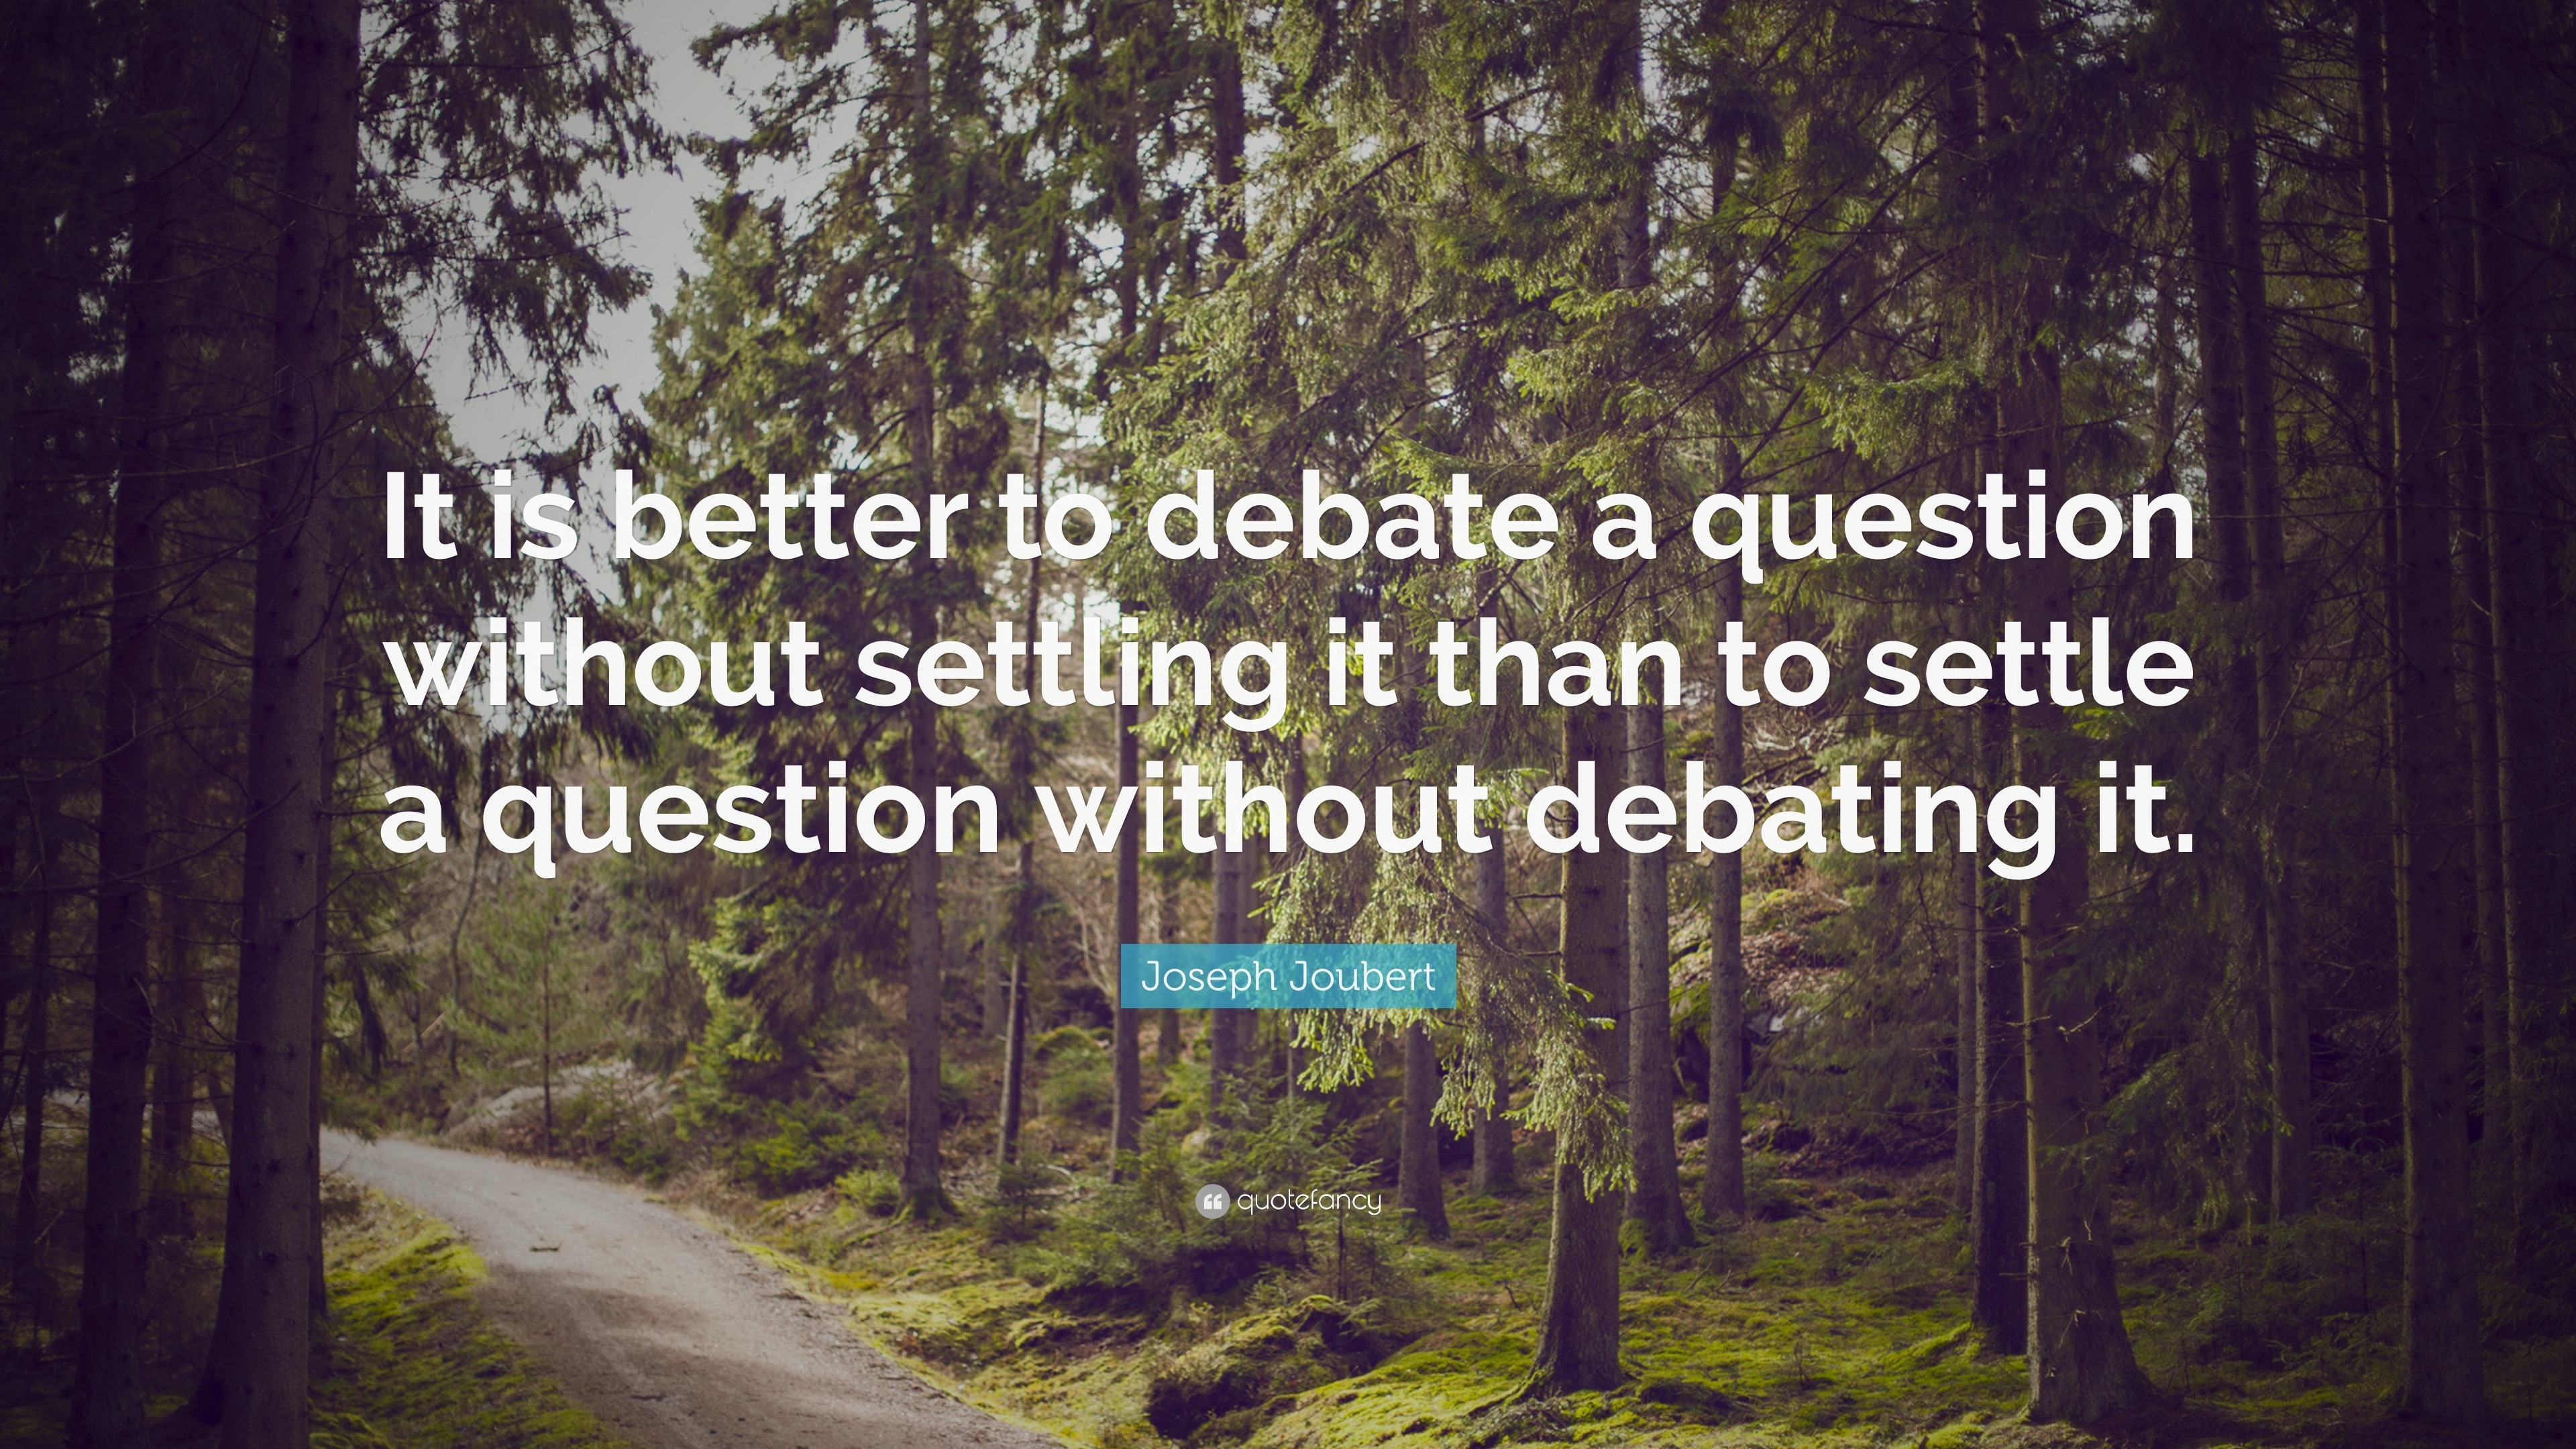 Joseph Joubert Quote “It is better to debate a question without